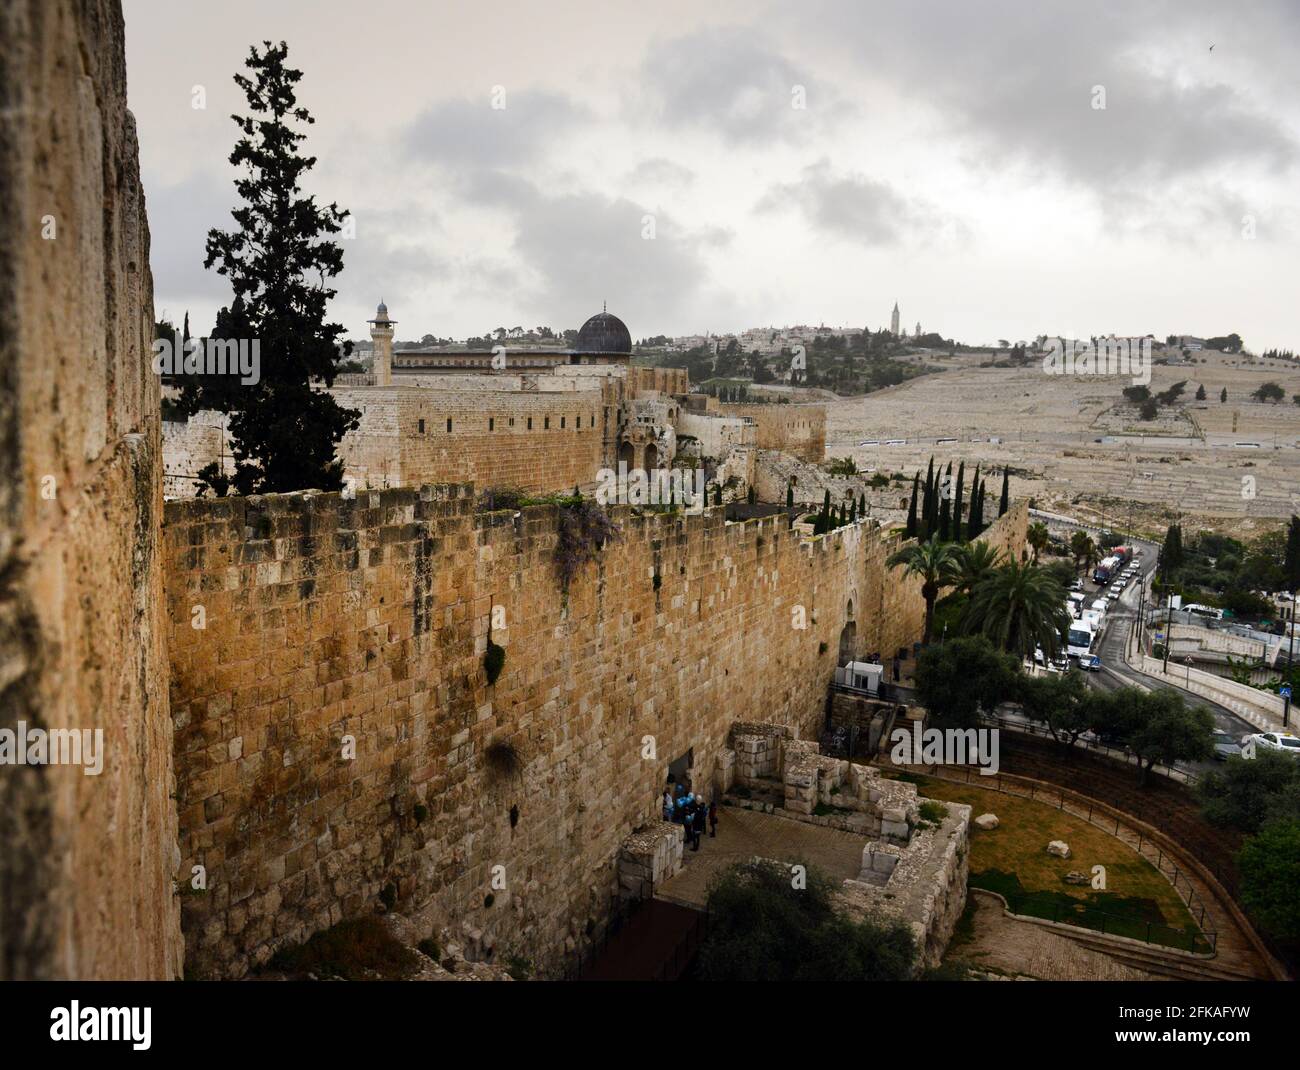 A view of the old city wall with the Temple Mount and the Mount of olives in the background. Stock Photo